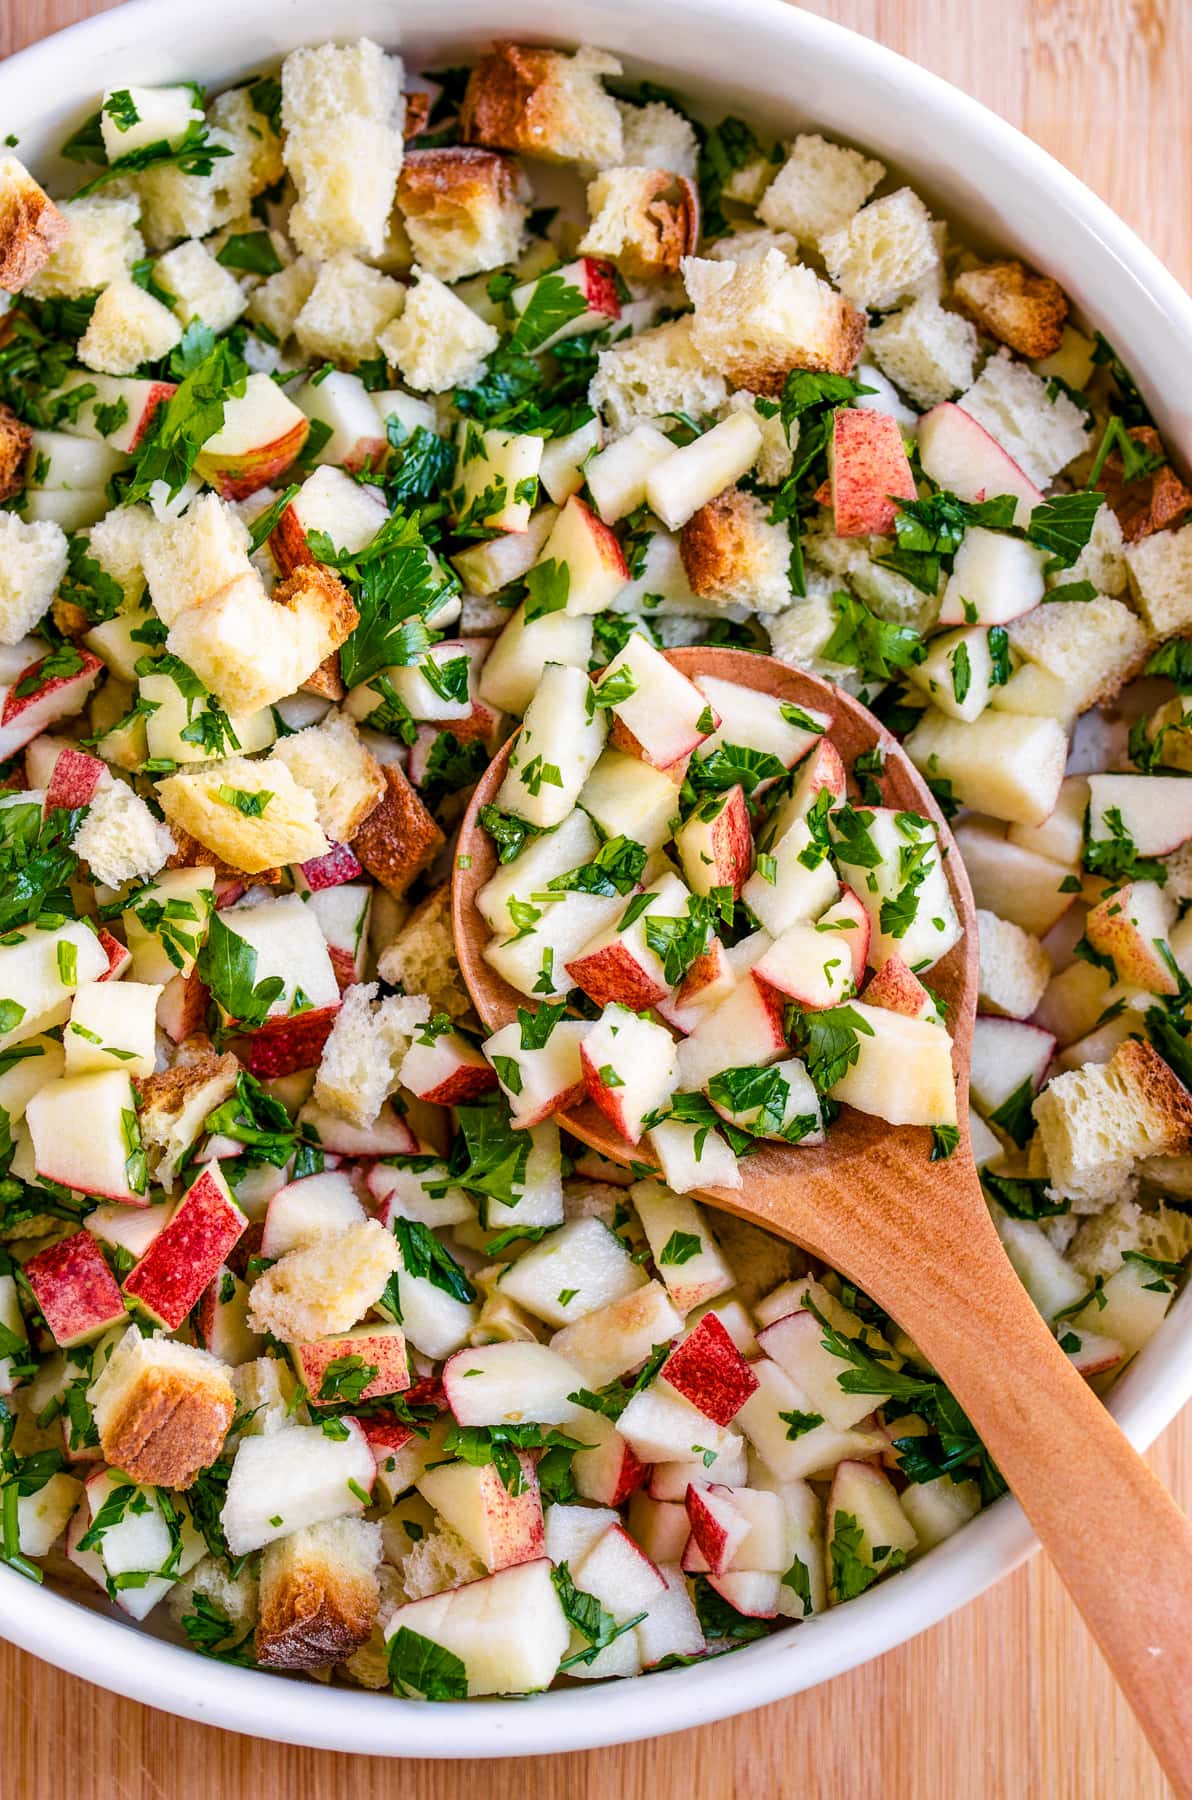 Mixing through diced apples, dried bread cubes, and fresh herbs in a bowl.